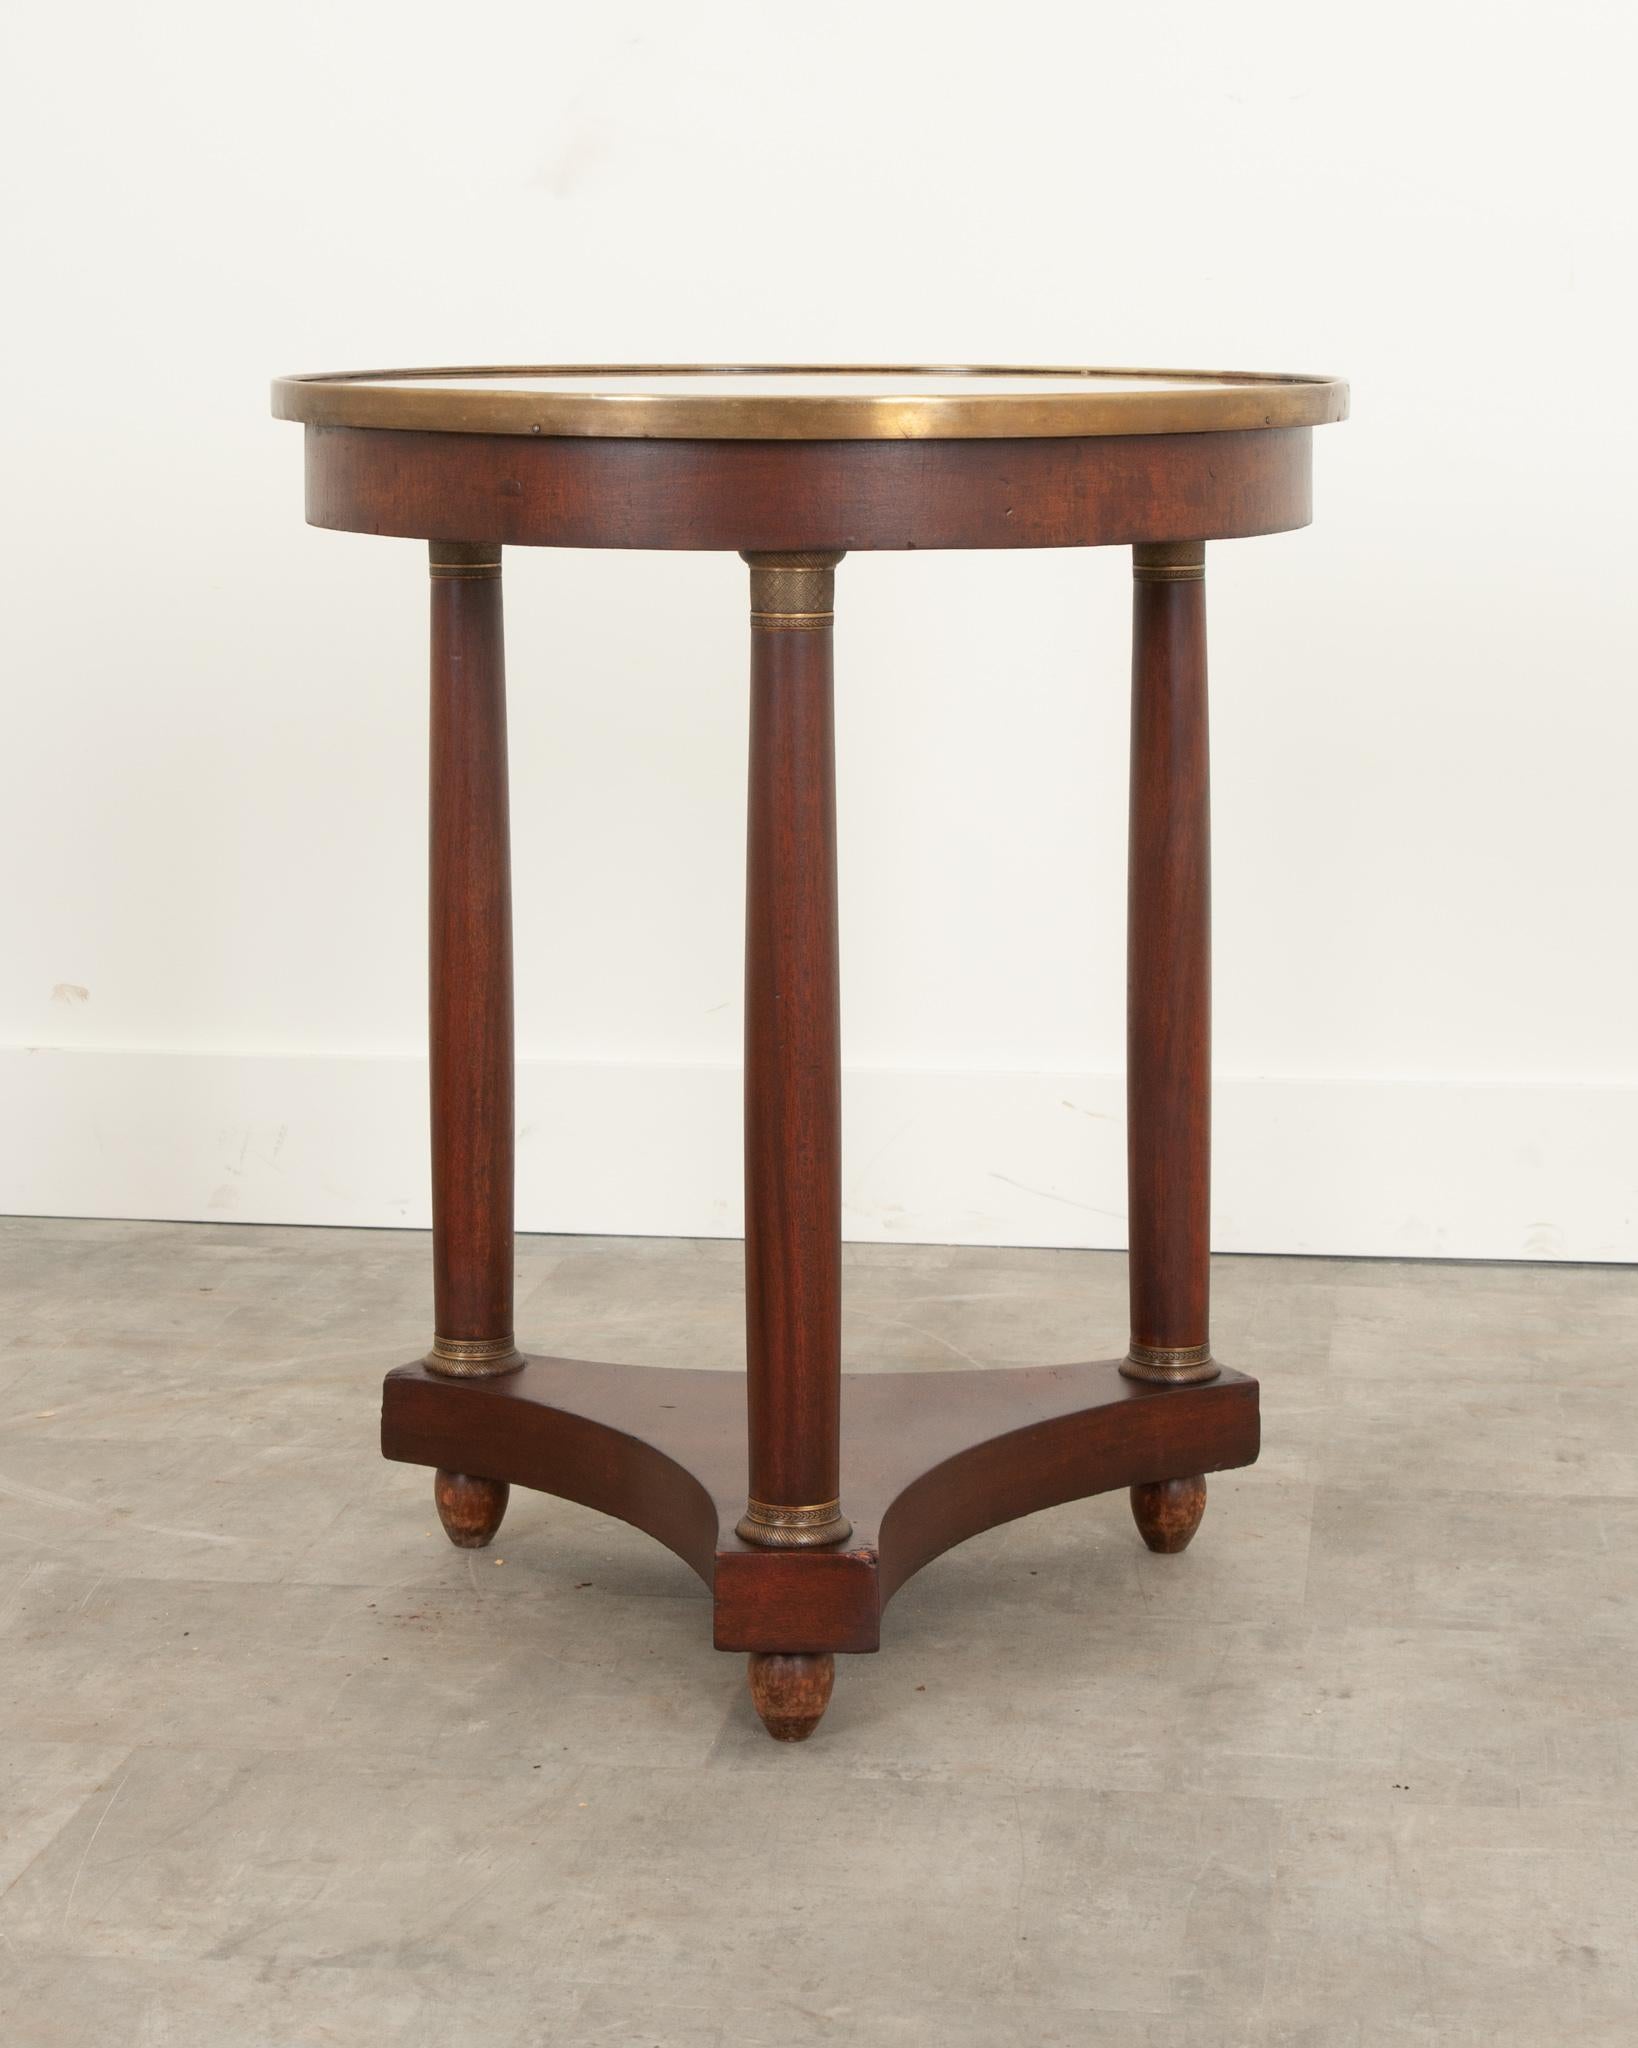 A handsome Empire gueridon crafted in France during the 19th century from beautifully patinated mahogany. Topped with black stone that’s in wonderful antique condition and encompassed with a thick, lustrous brass band. Three column-form legs feature